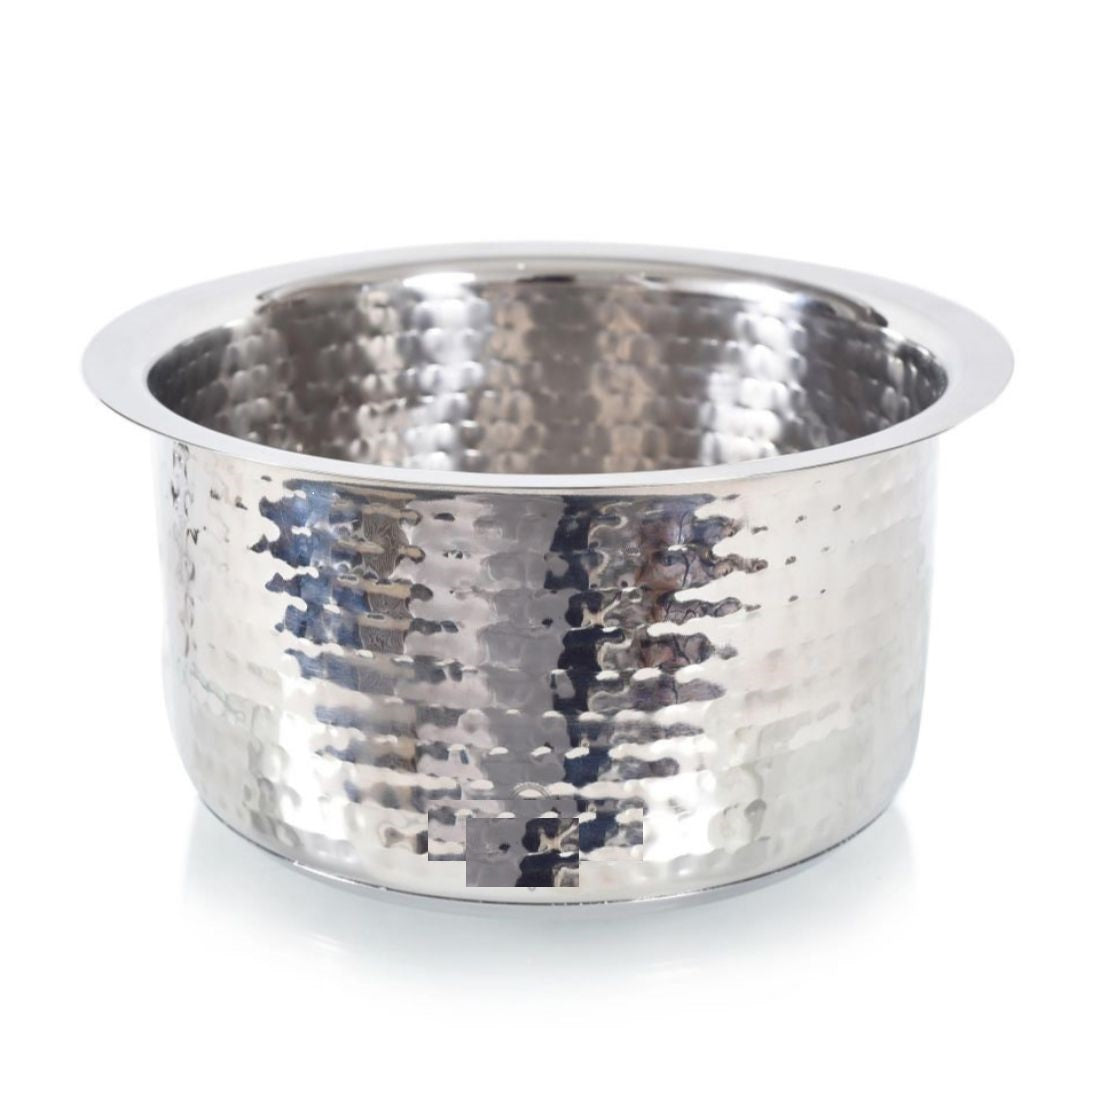 Aluminium Indian Hammered Deep Pot 7.5L with Lid No19 Round Heavy Duty 6220